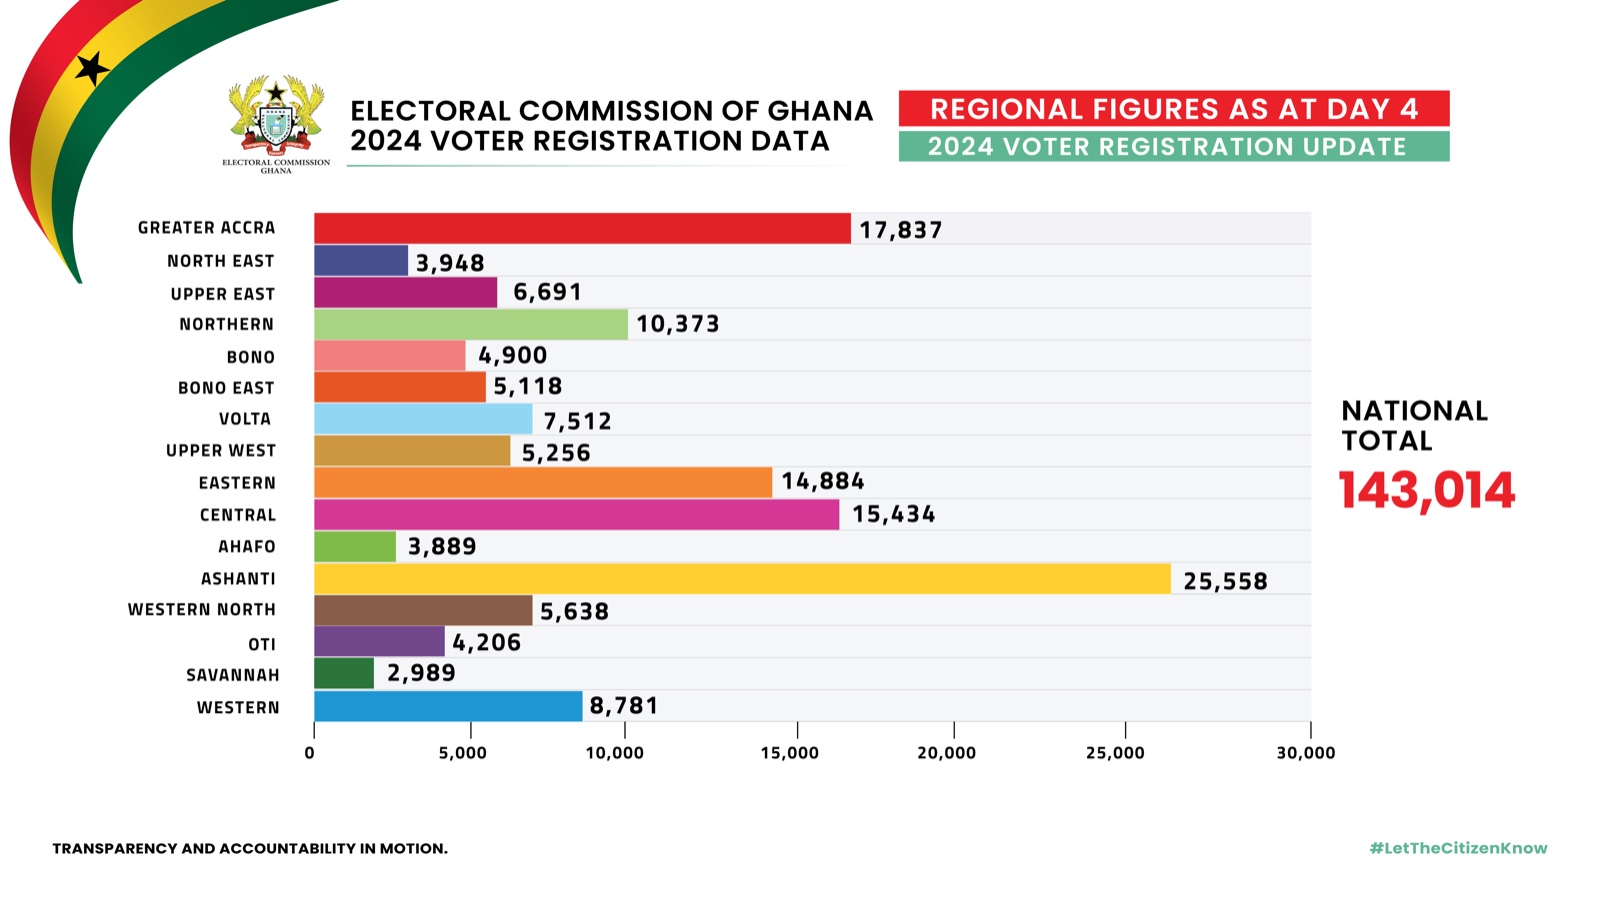 Electoral Commission of Ghana data